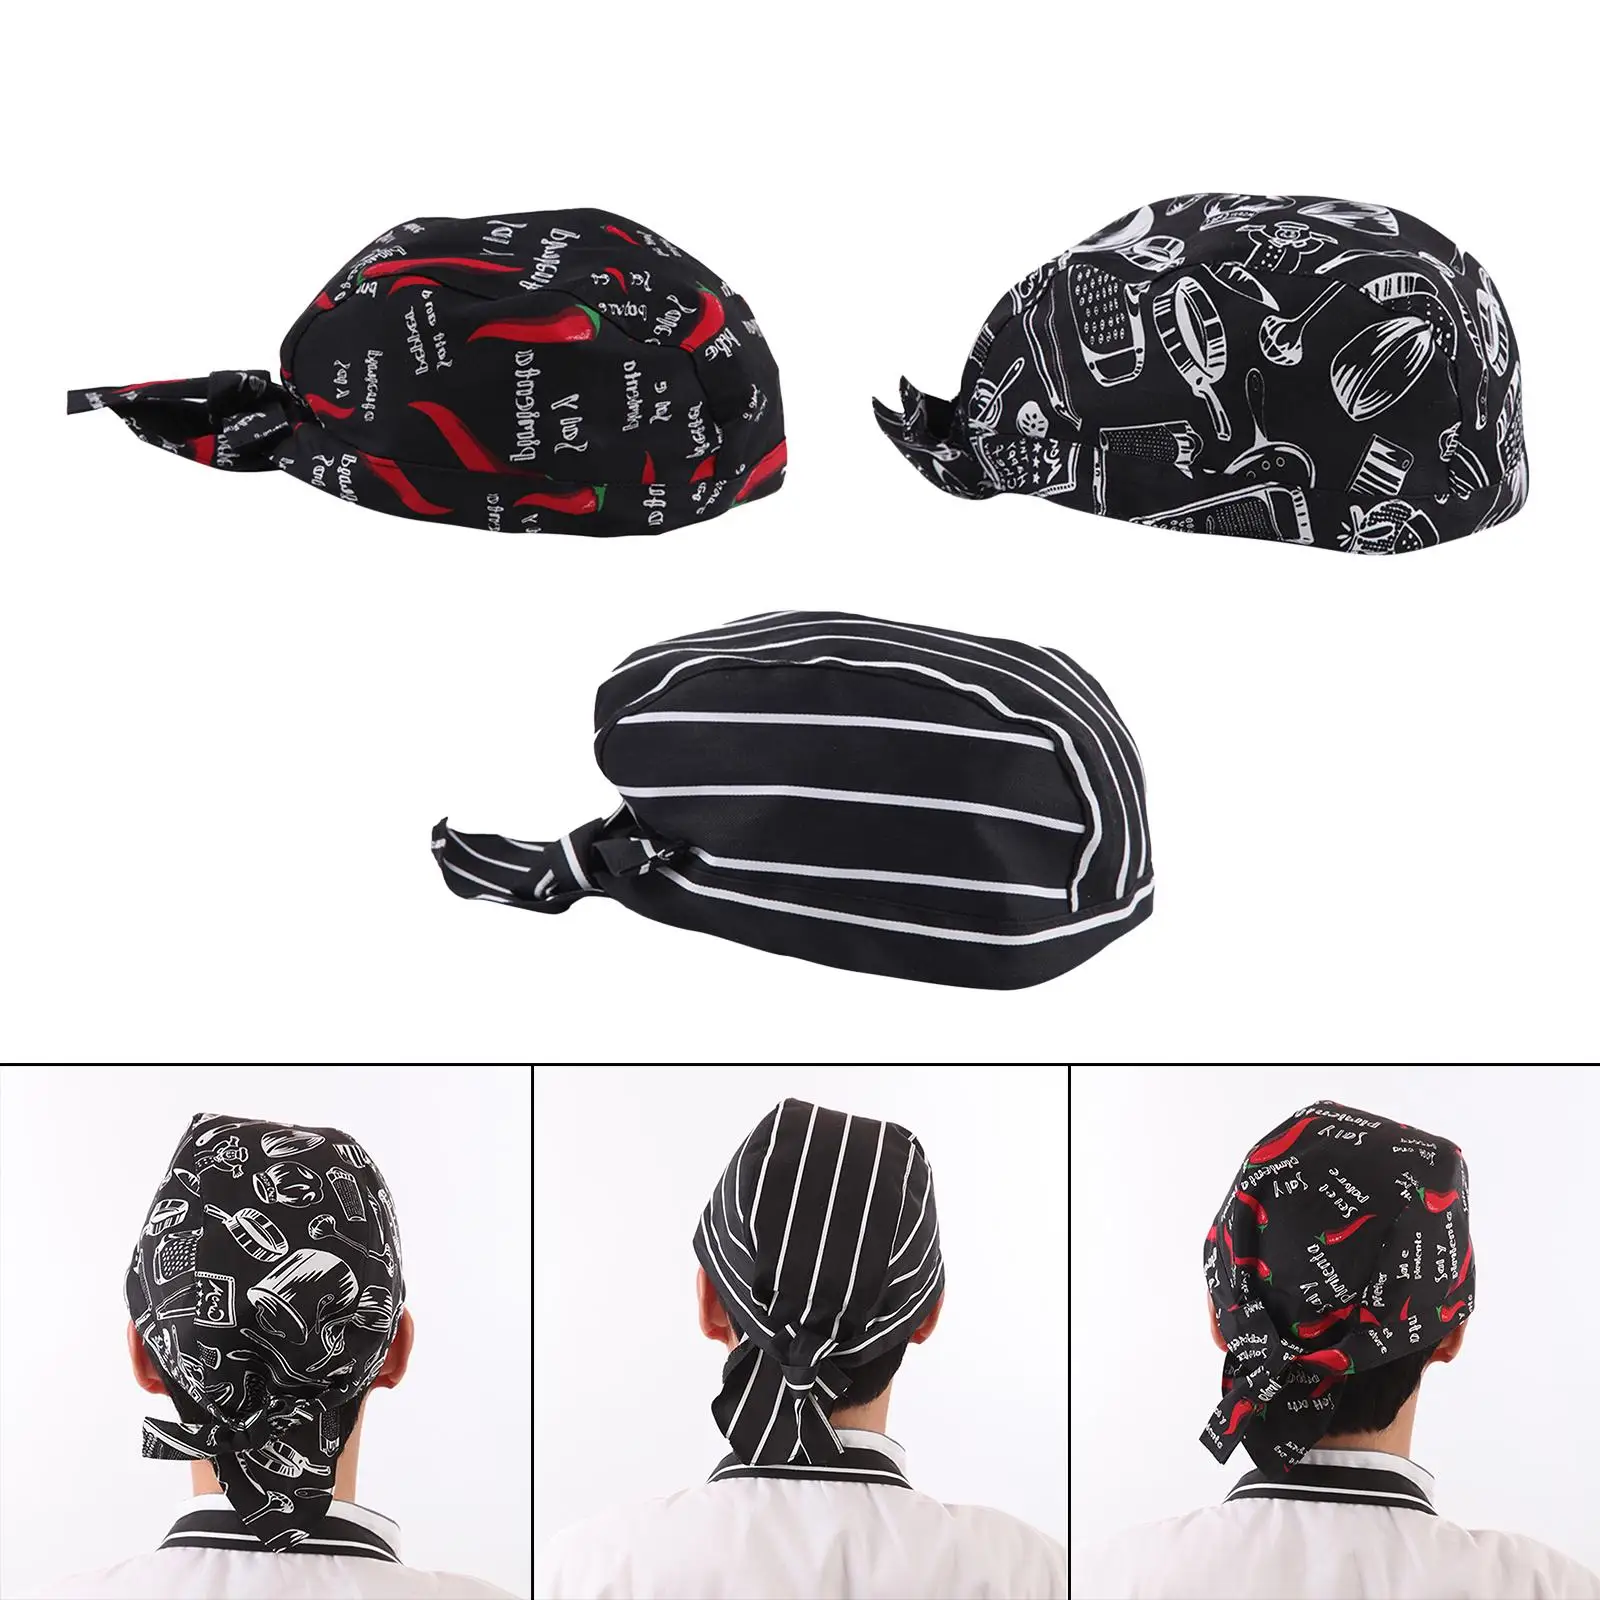 3Pcs Chef Hat Fashion Waiter Cap Kitchen Cooking Cap Working Caps Bandana Head Scarf for Worker Catering Cafe Hotel Restaurant